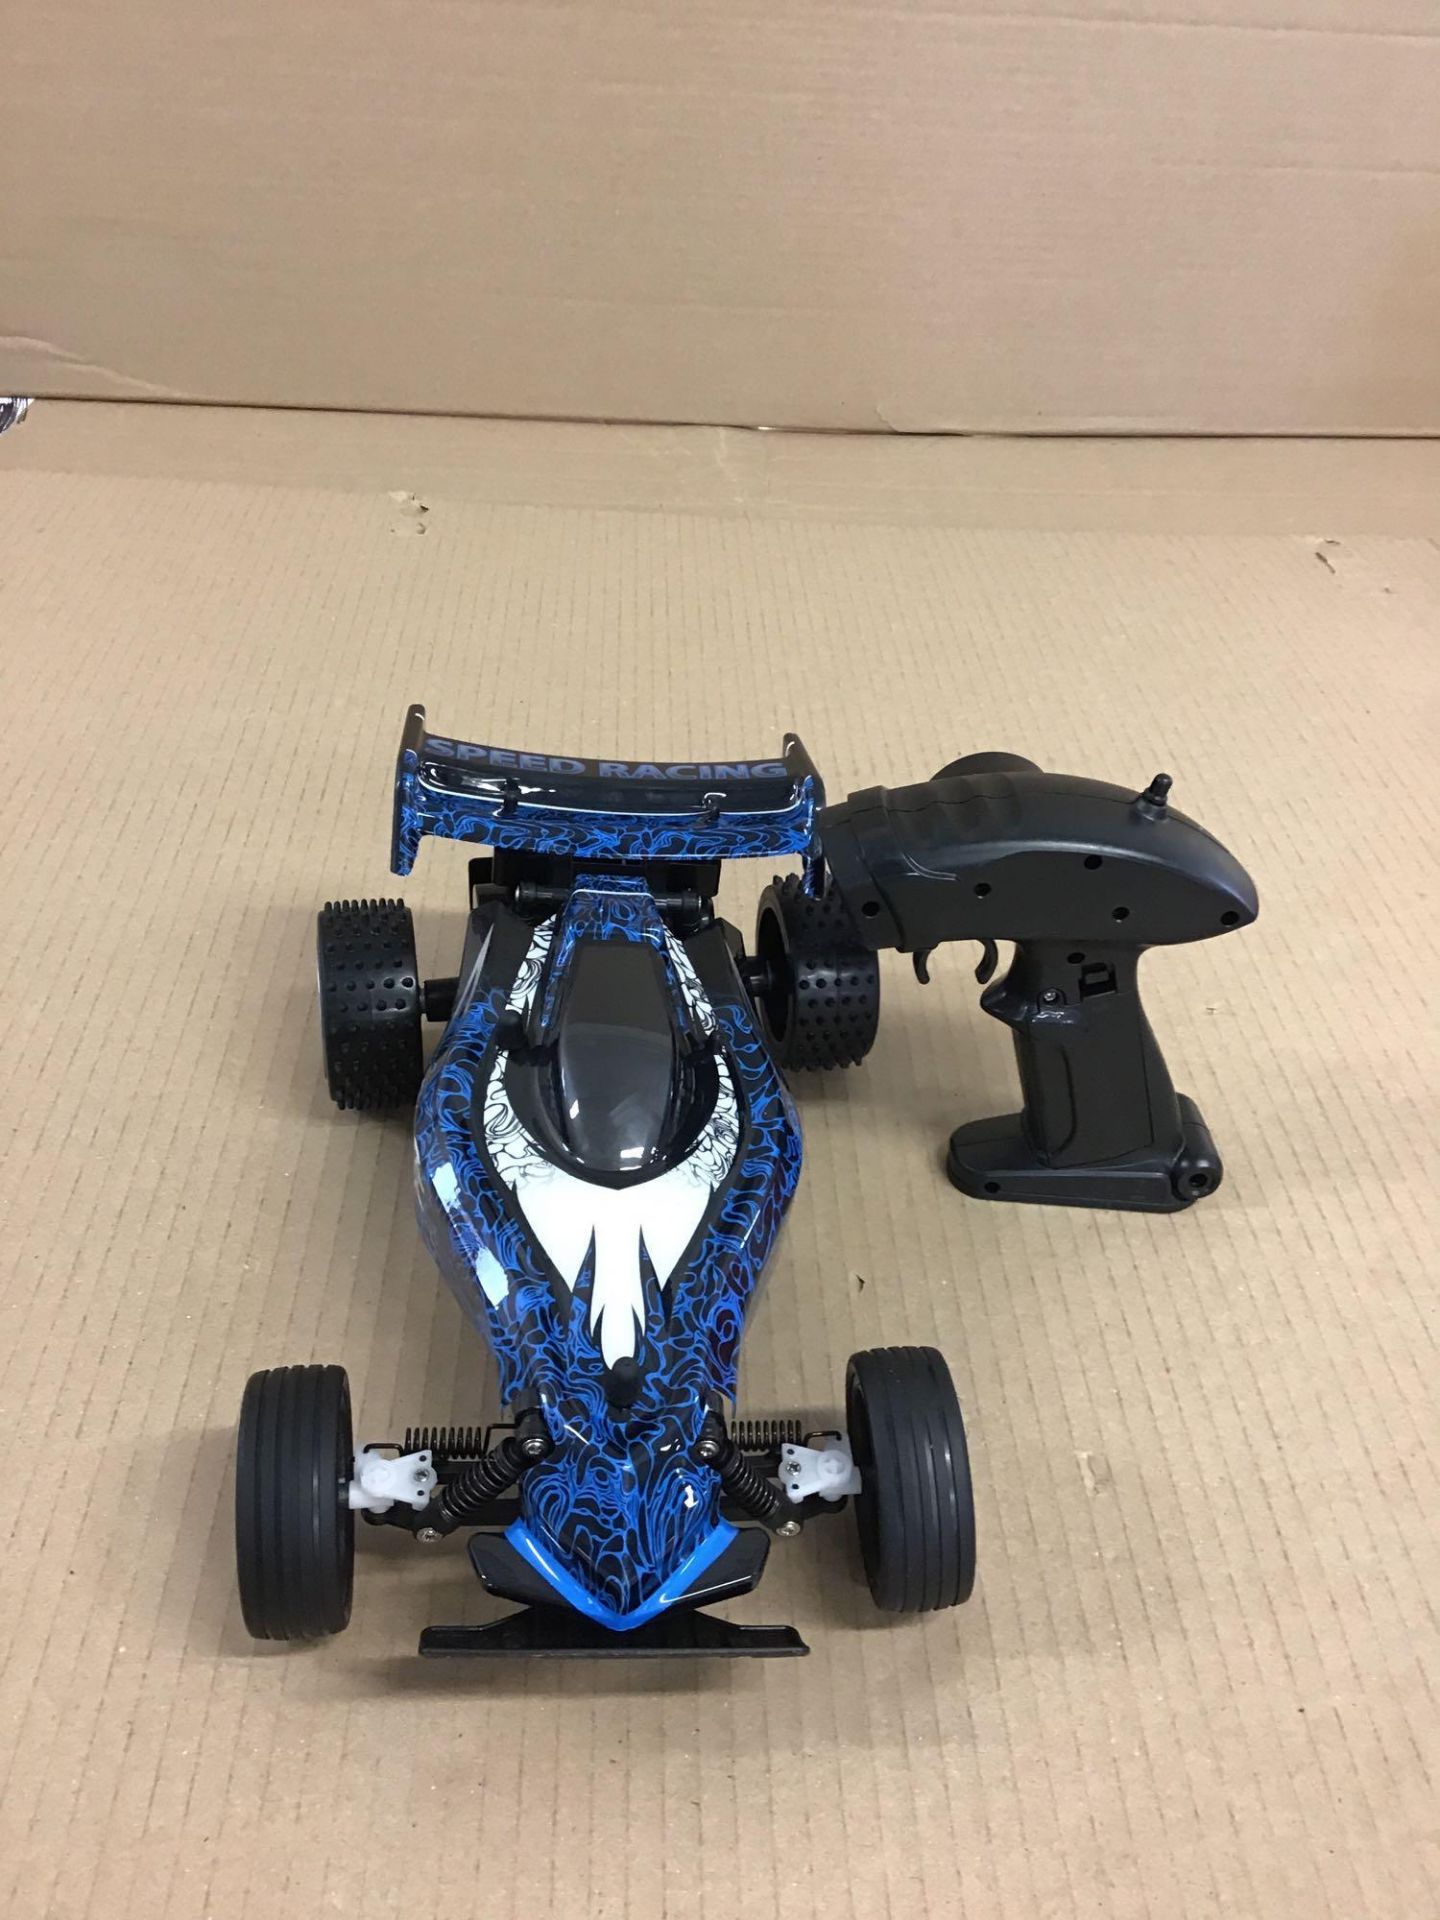 Radio Controlled High Speed Racer 1:16 Scale - Blue 2.4GHZ, £20.00 RRP - Image 3 of 5